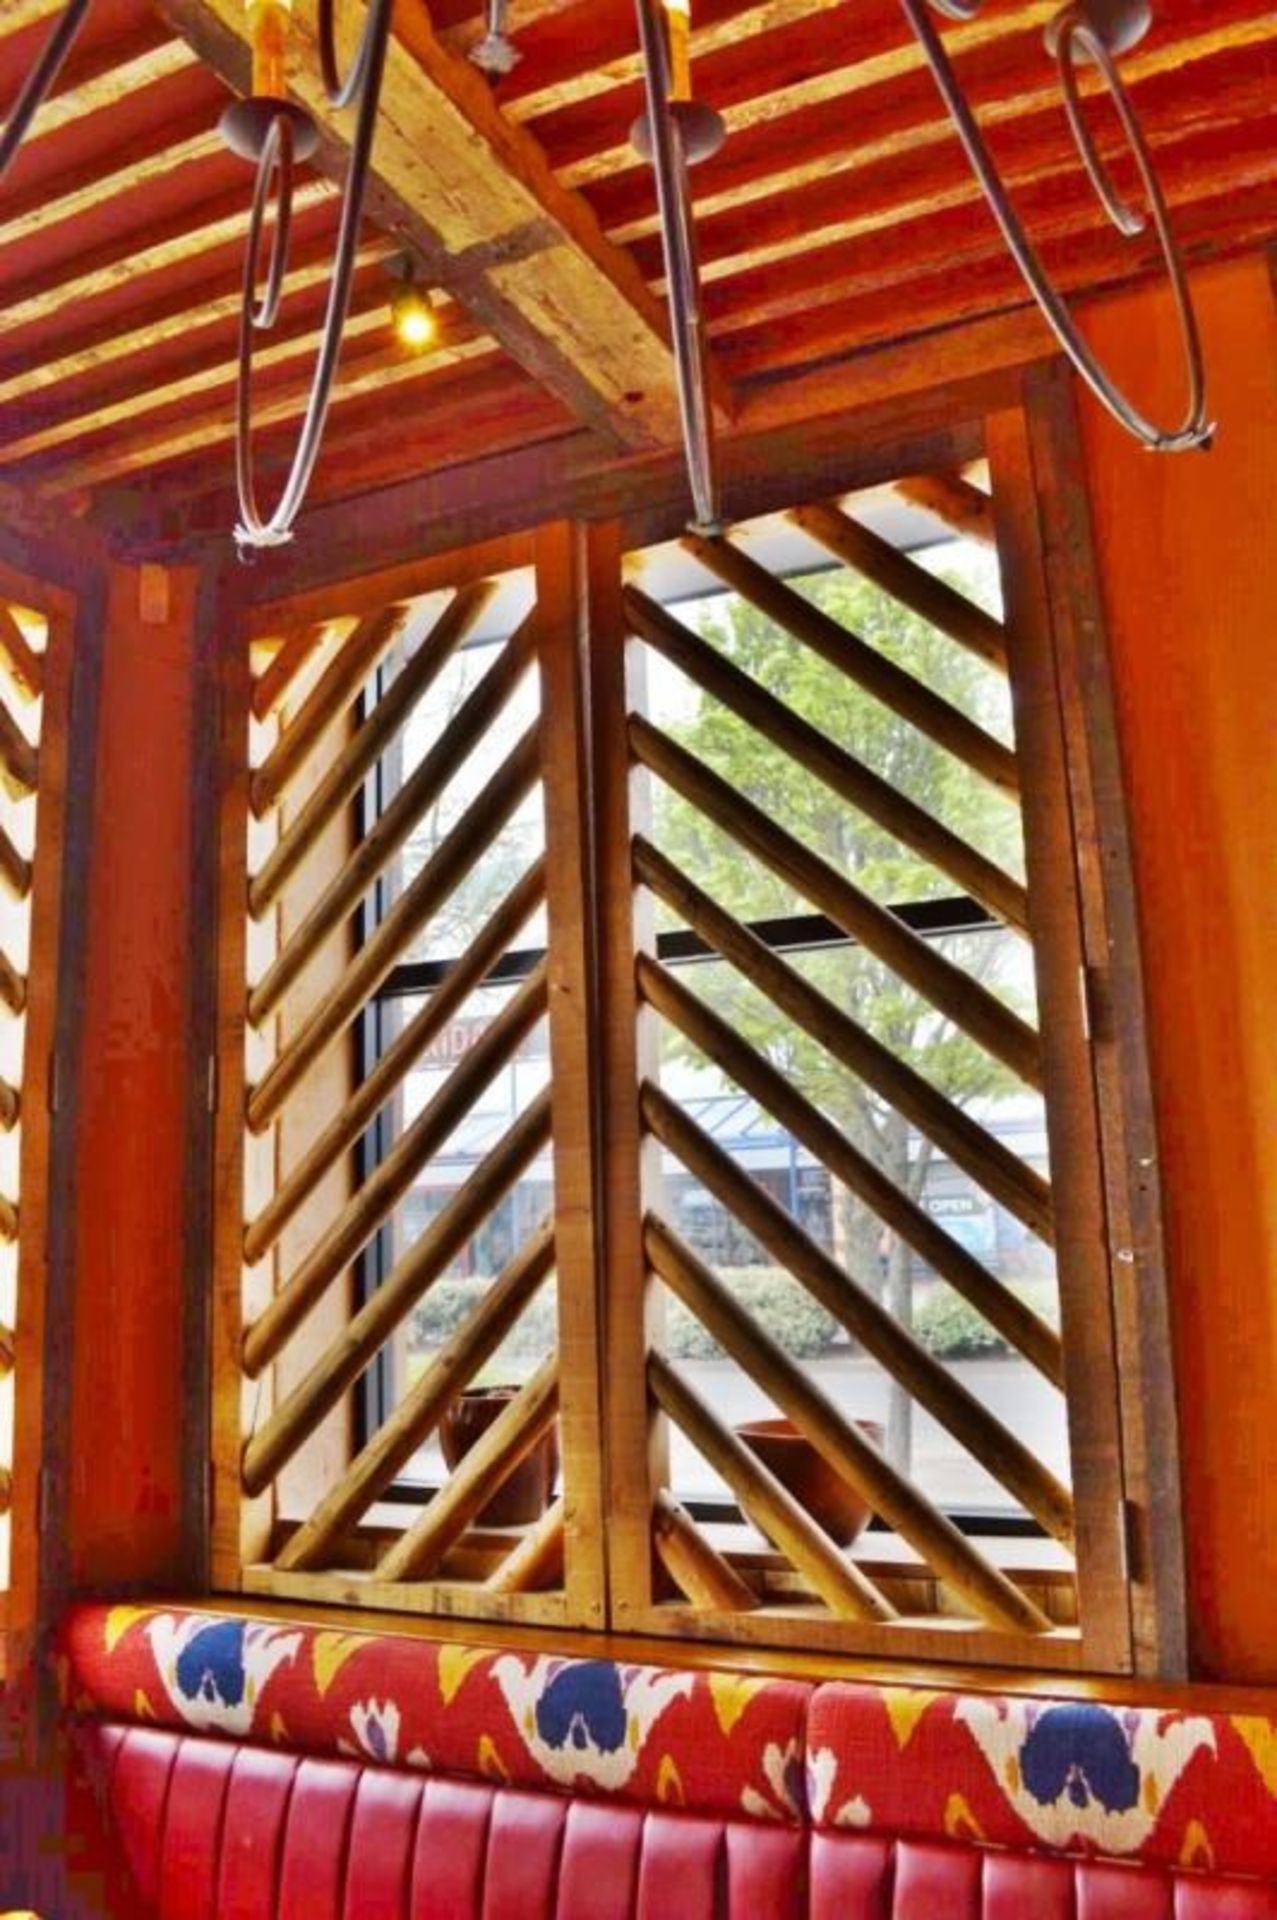 4 x Wooden Timber Window Shutters - Each Shutter Features Two Timber Frames With Round Wood - Image 2 of 5